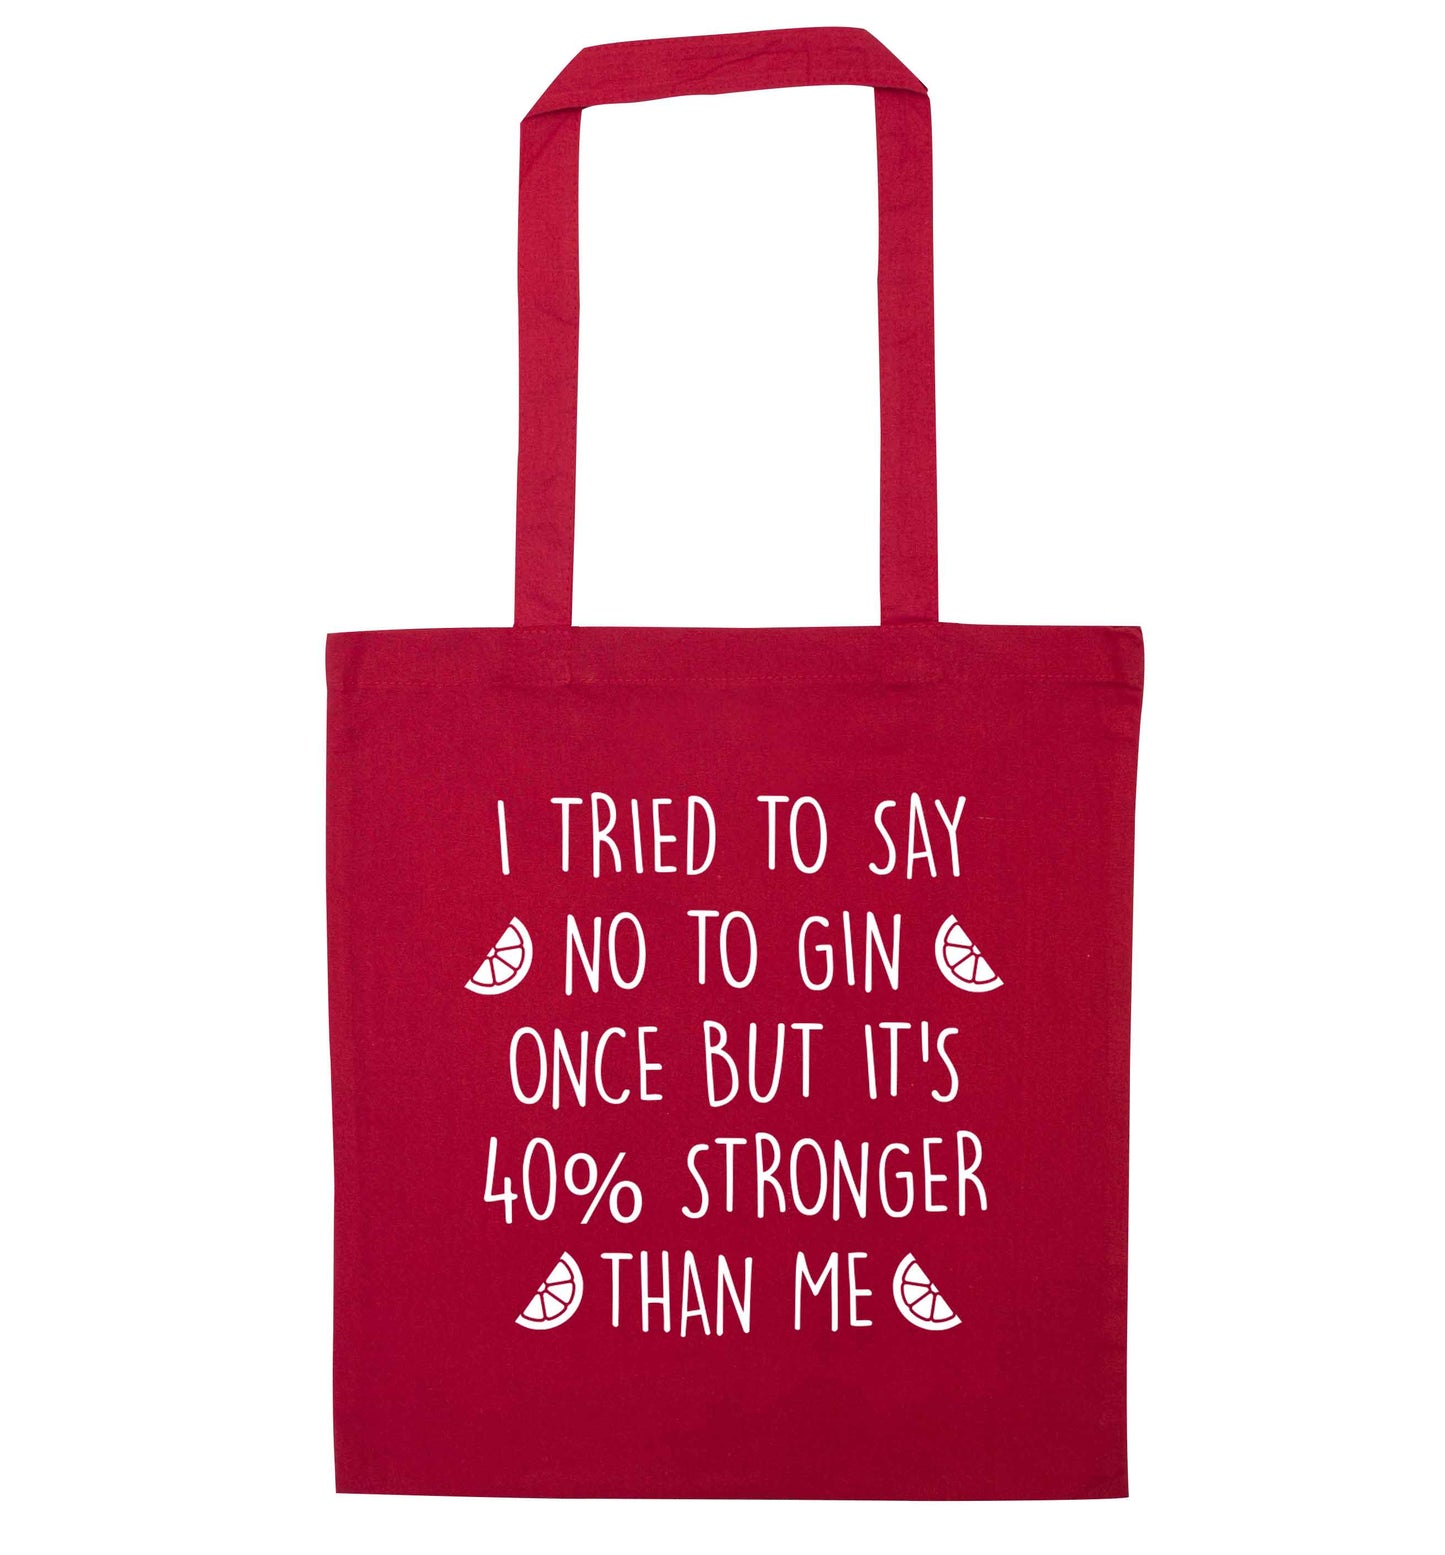 I tried to say no to gin once but it's 40% stronger than me red tote bag